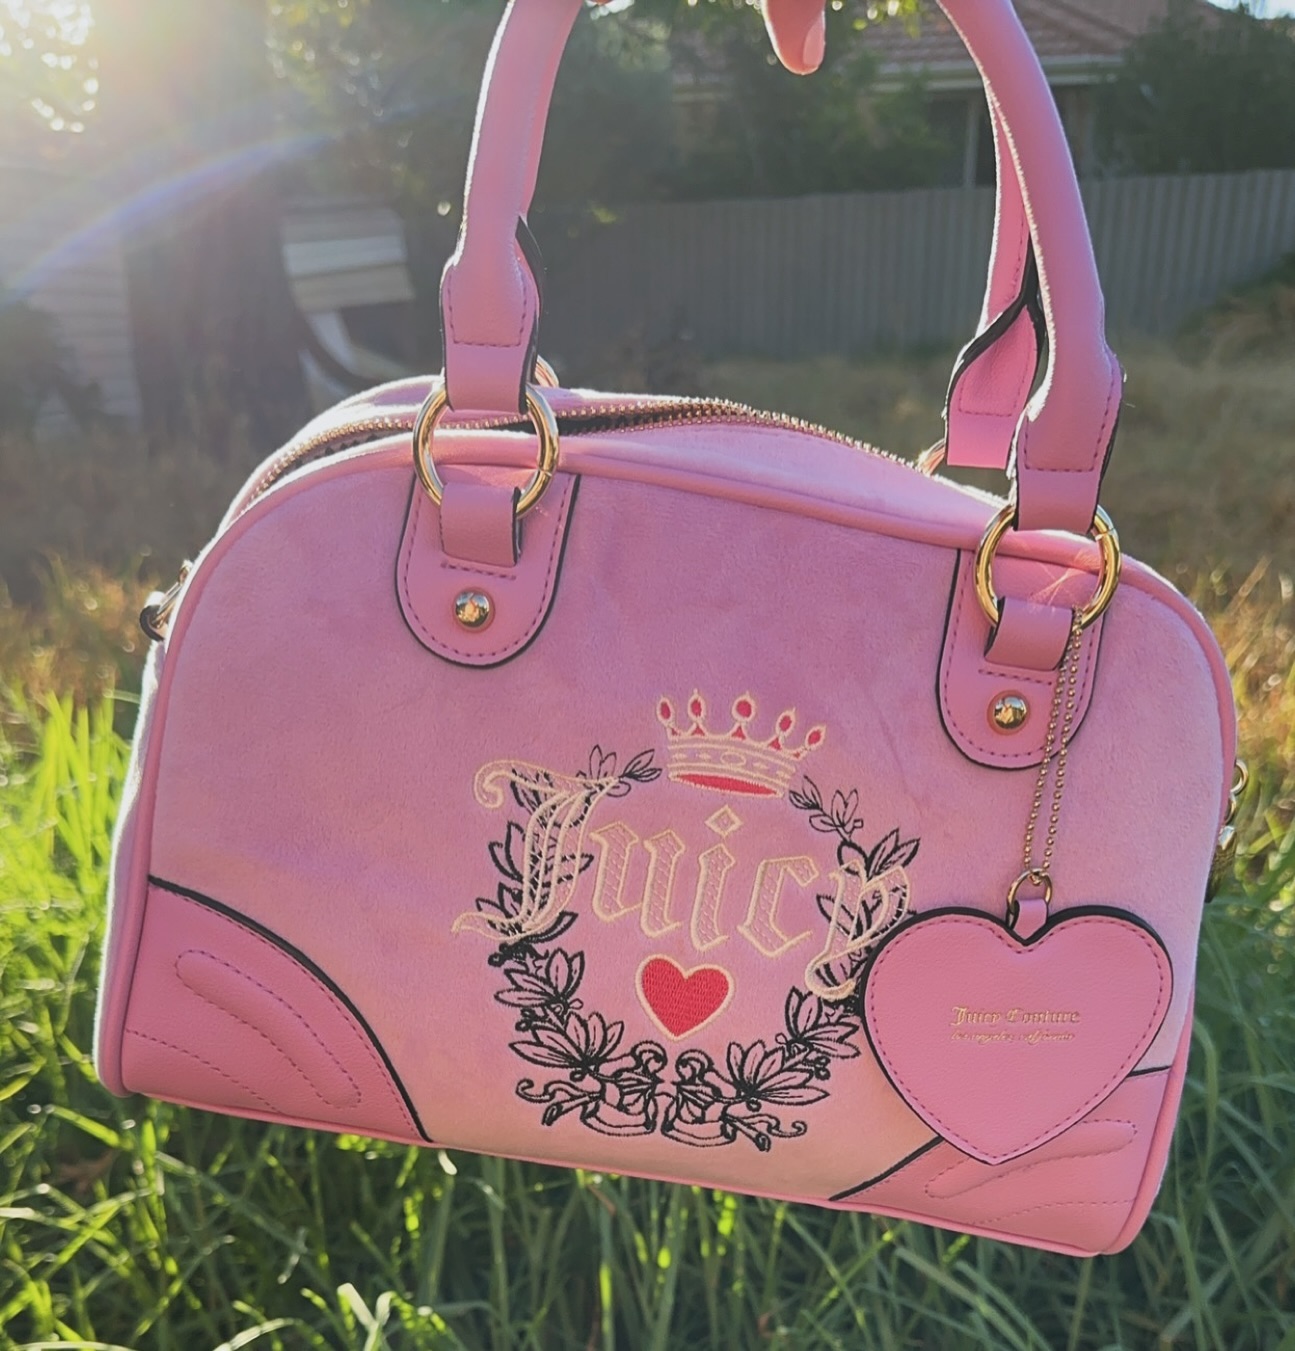 High key obsessed with my new bag! Isn’t she so cute?! 😍🤩